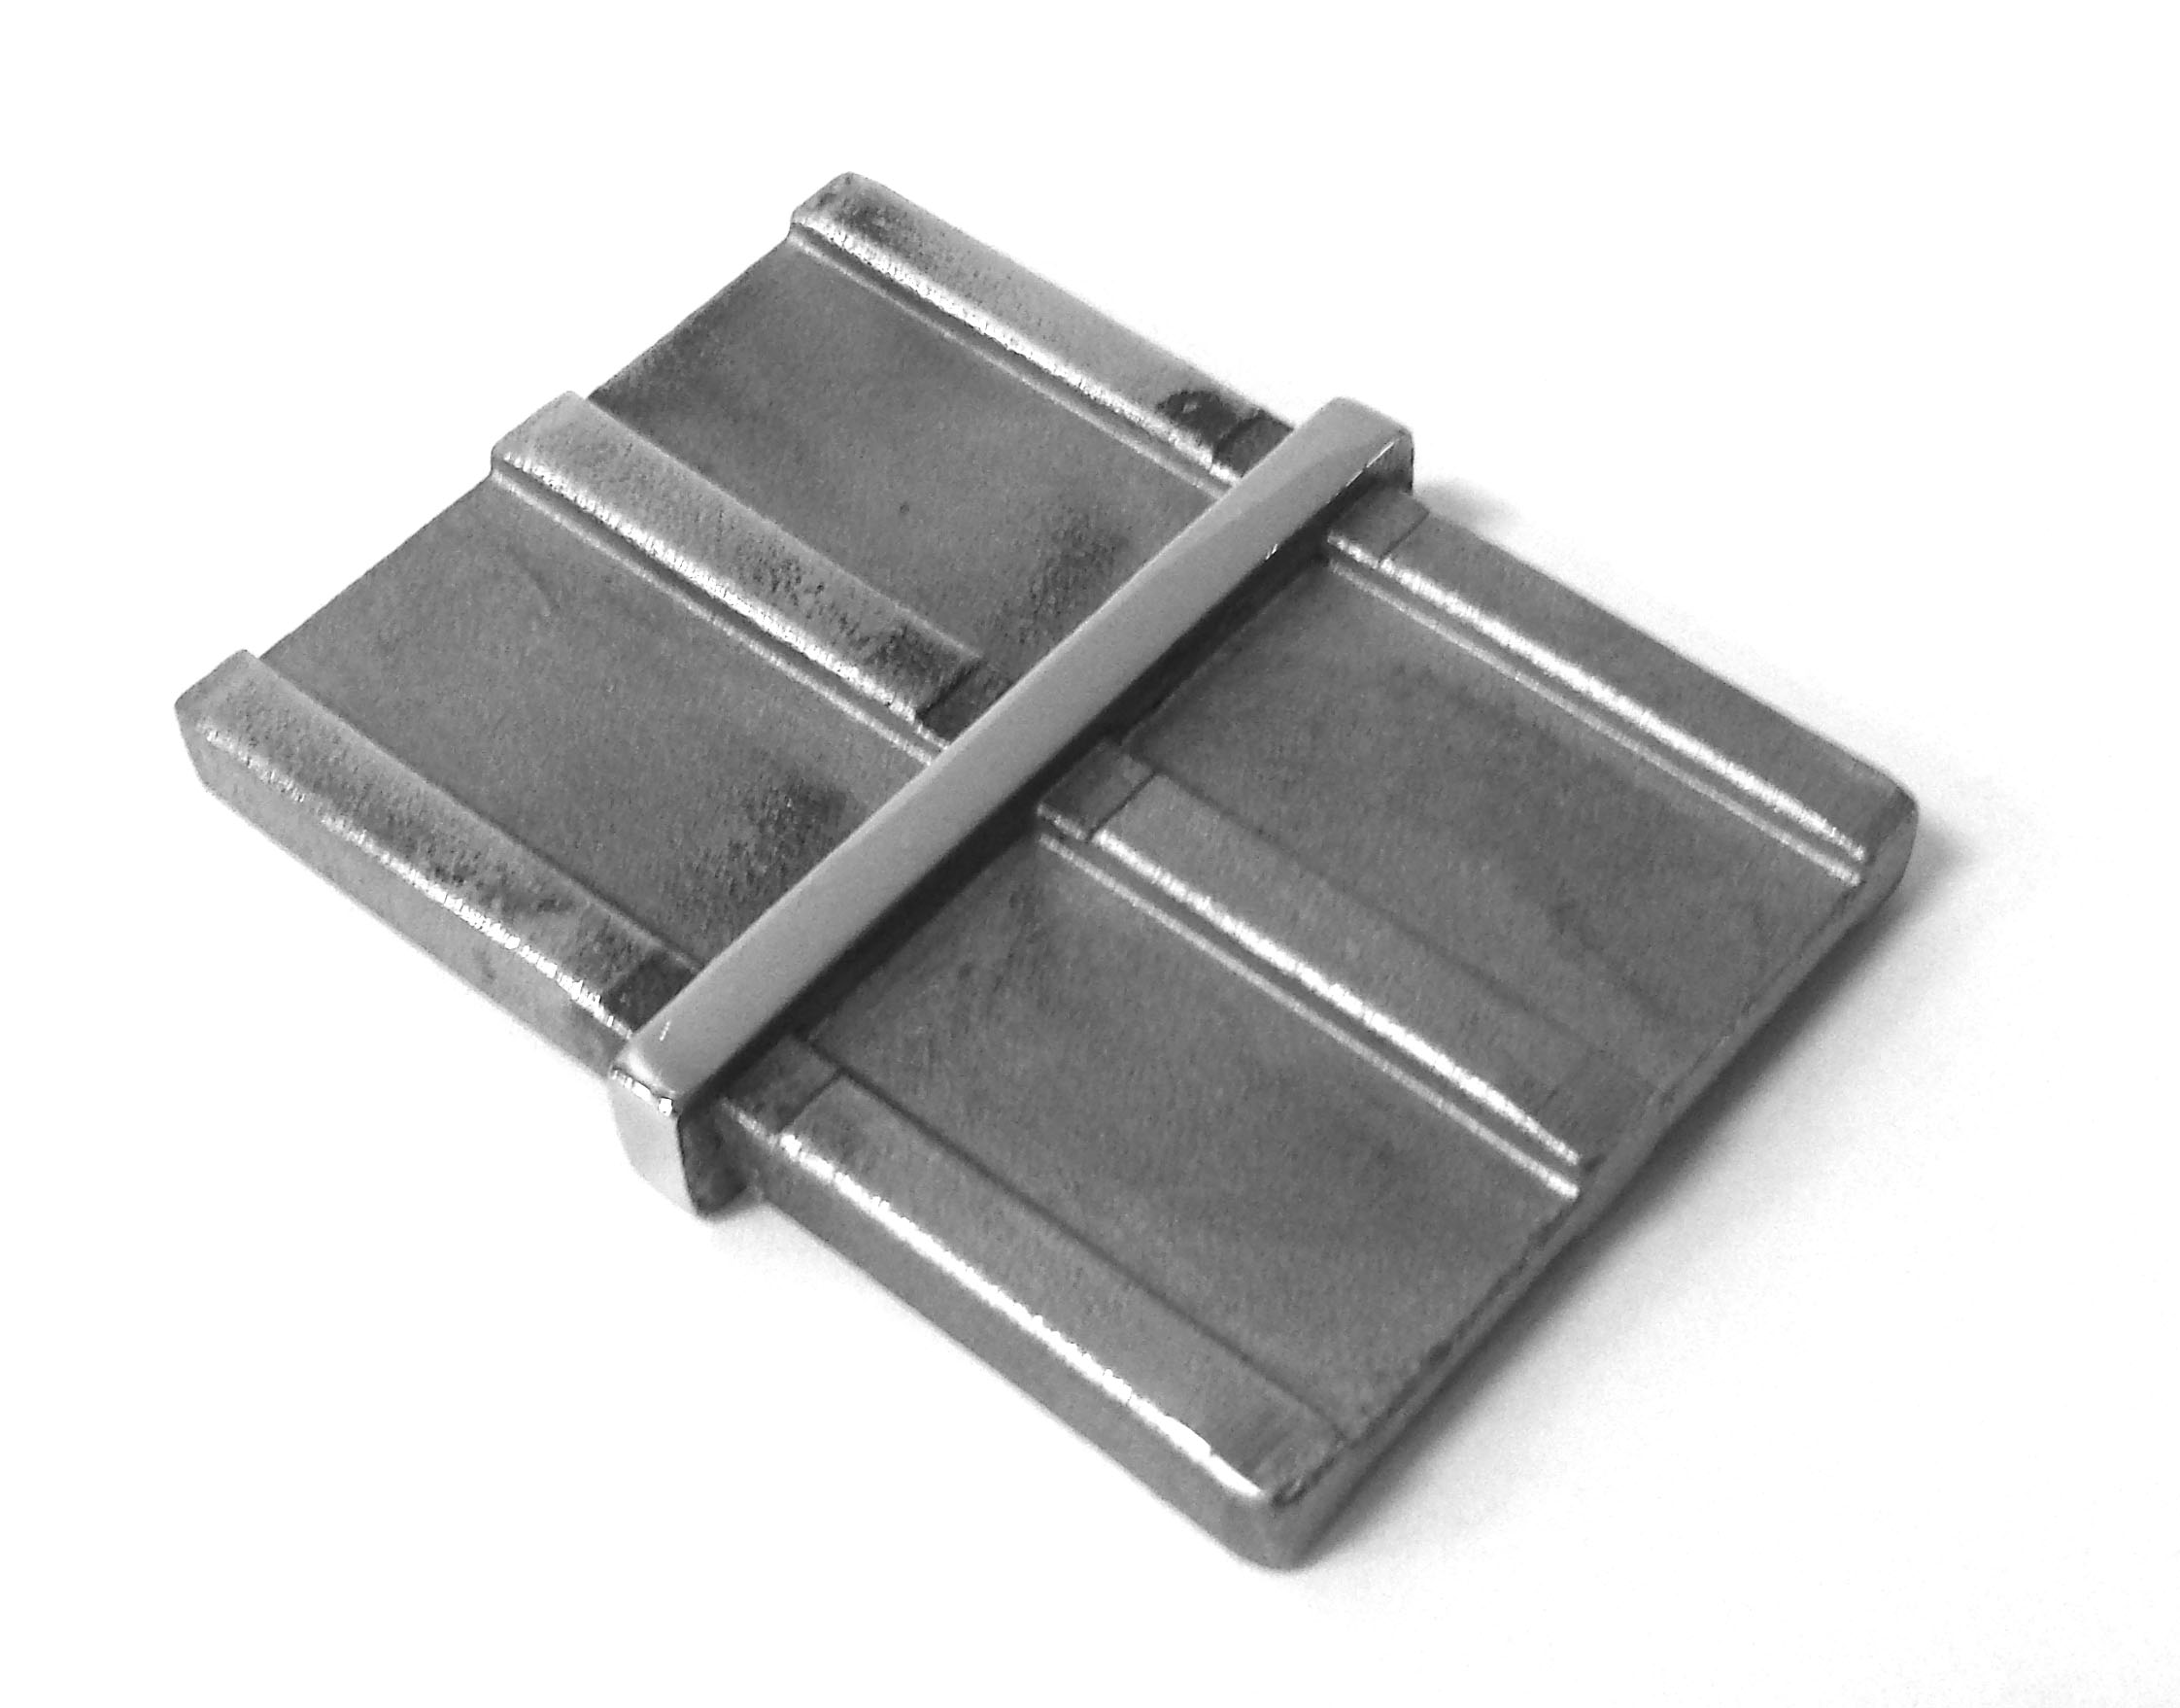 Joiner 10 x 50mm Stainless Steel - Polished